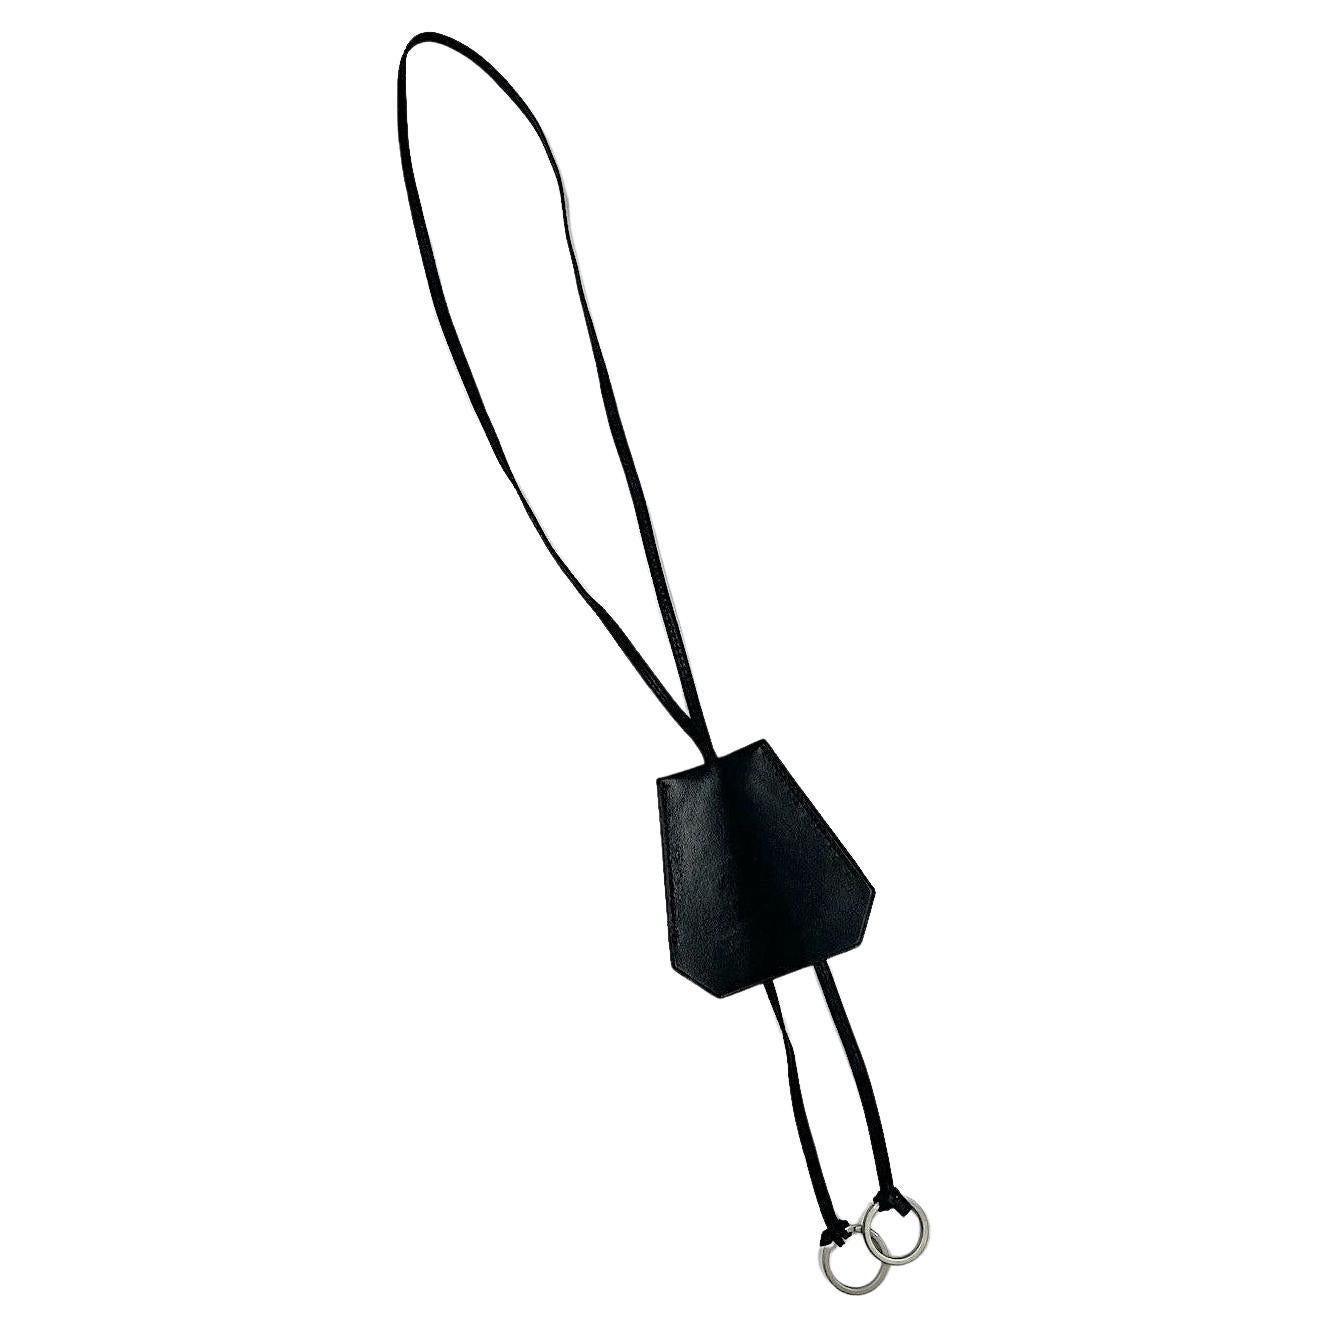 HERMES "Le Touquet" Key Holder in Black Leather